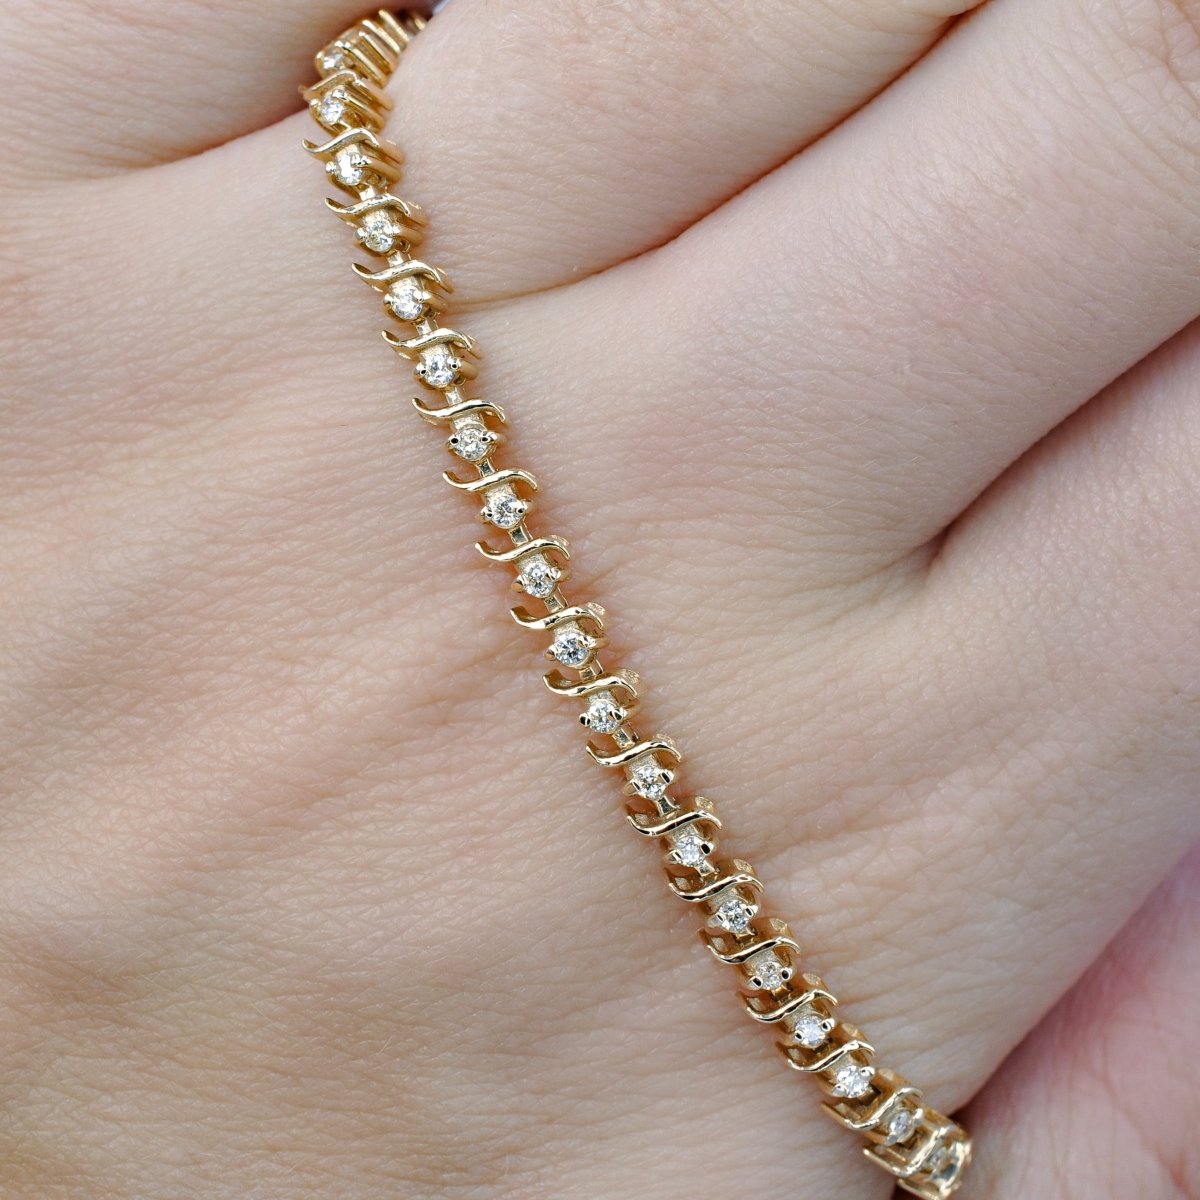 Affordable 1.00CT Round cut Diamond Tennis Bracelet in 14KT Yellow Gold - Primestyle.com